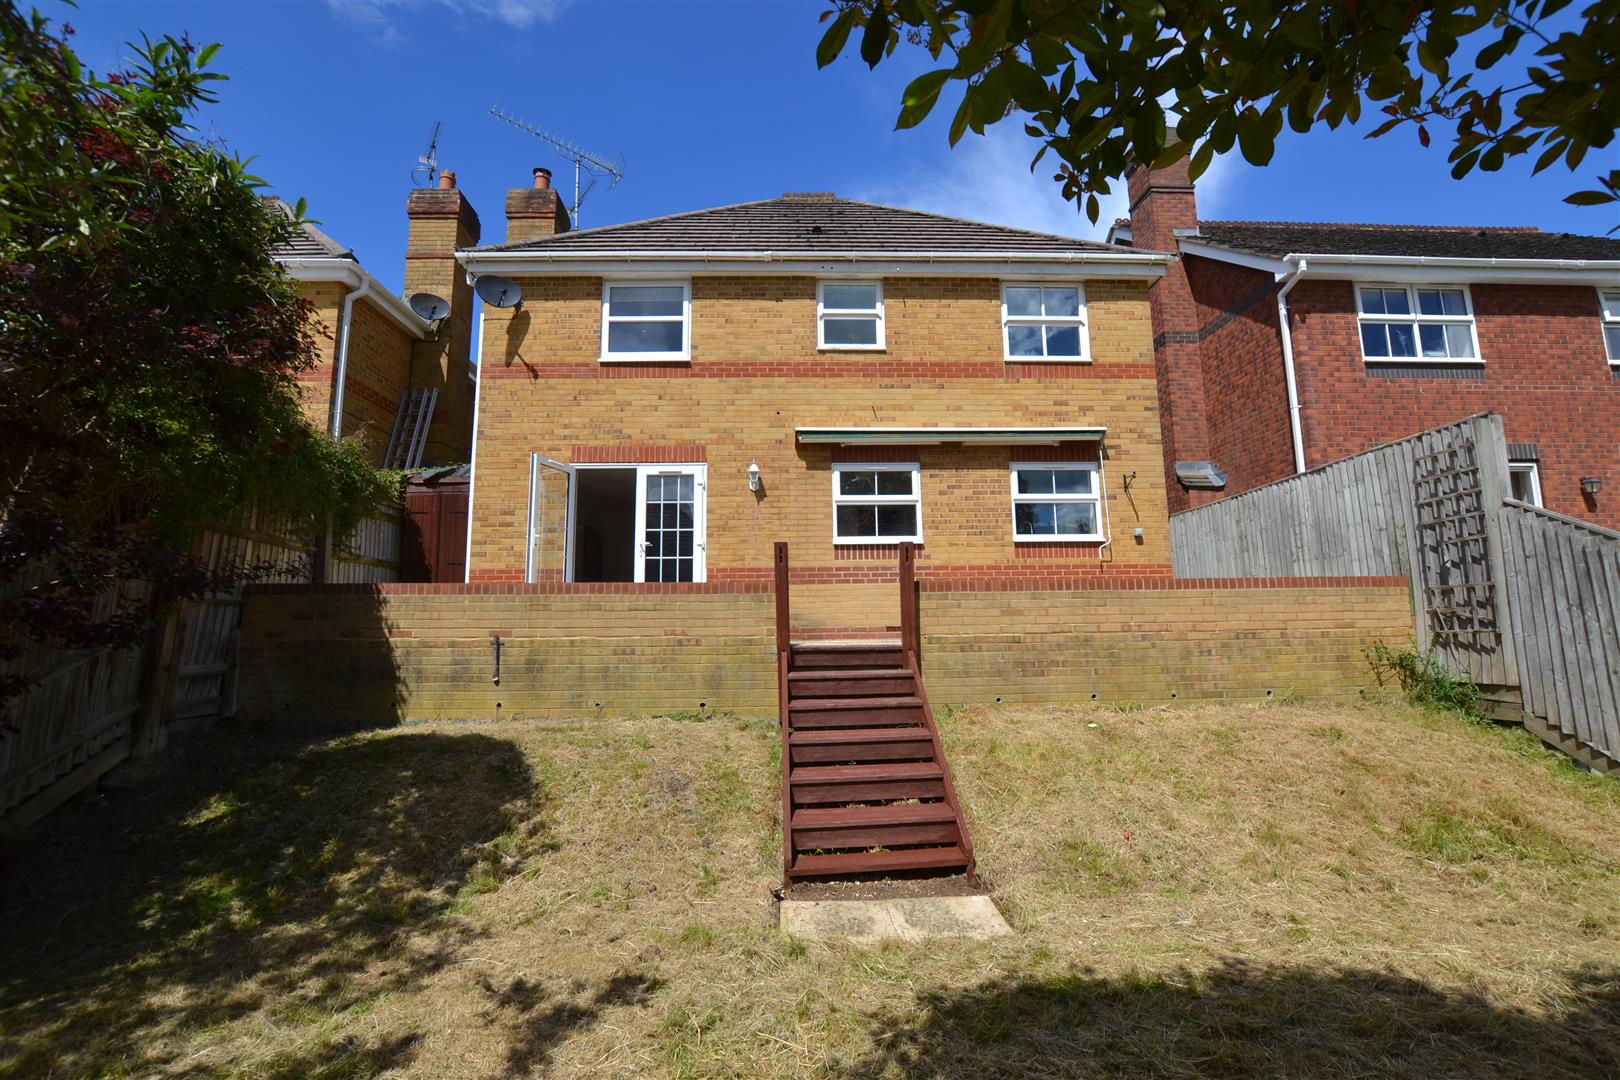 Rhigos Emmer Green house for sale in Reading